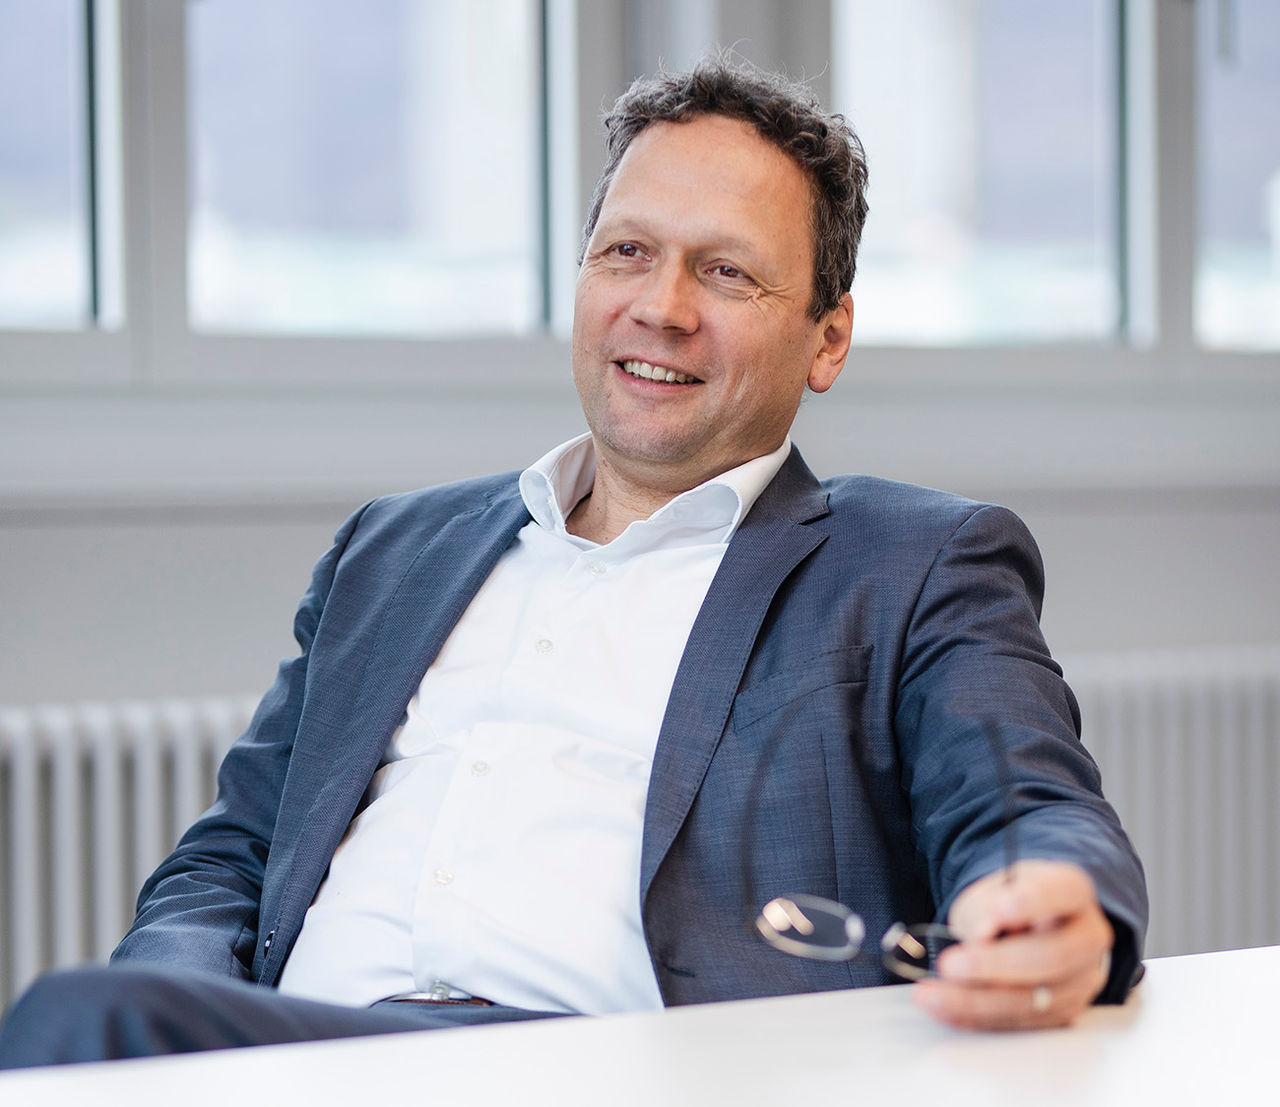 Implementing innovation: An interview with Accelleron CTO Dirk Bergmann